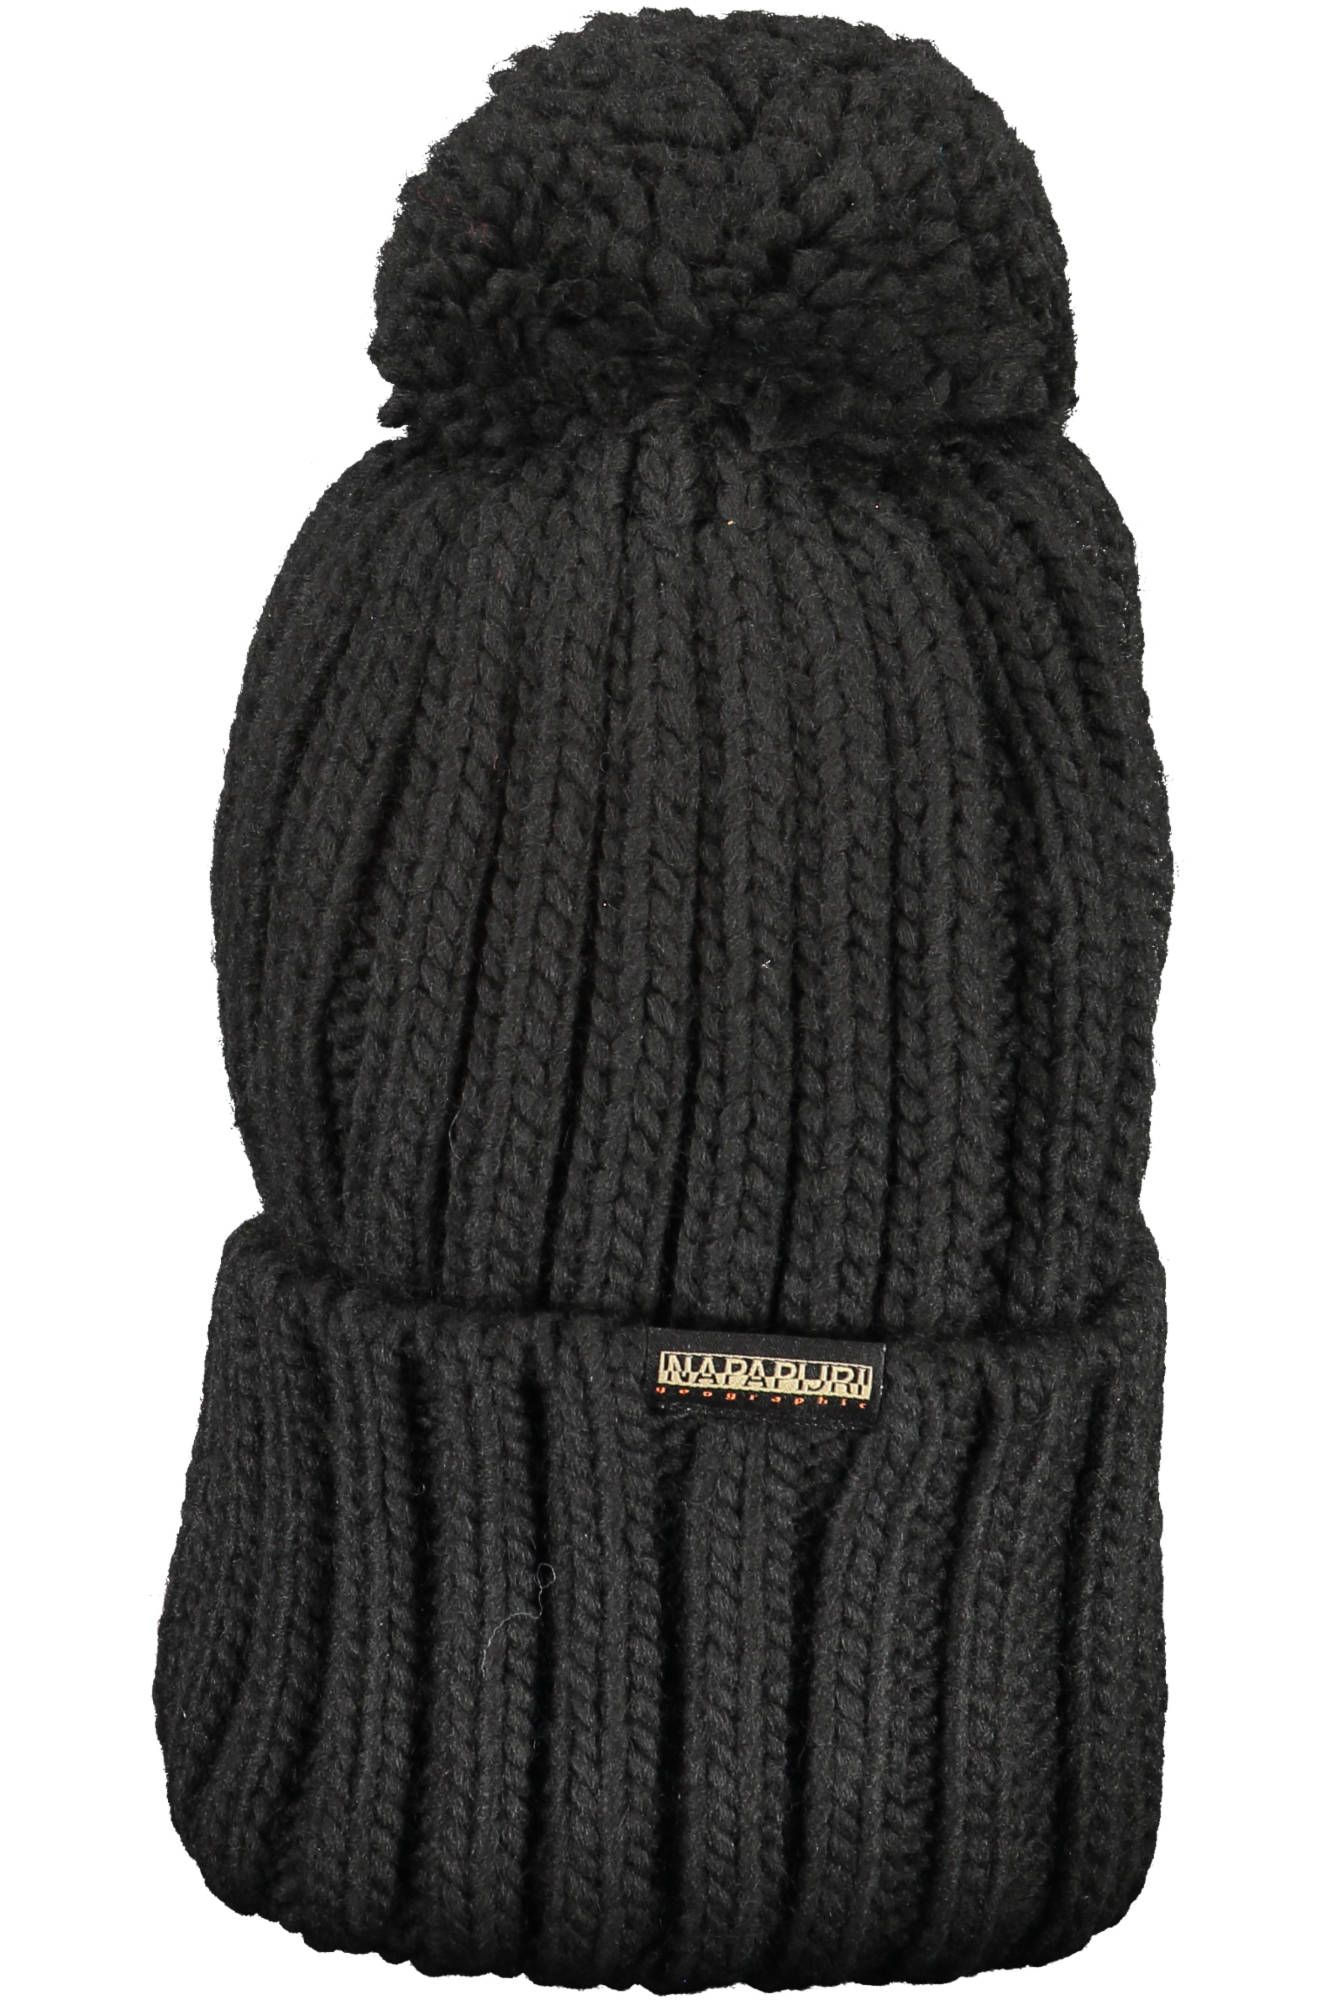 Black Wool Hat with Pompon and Embroidery